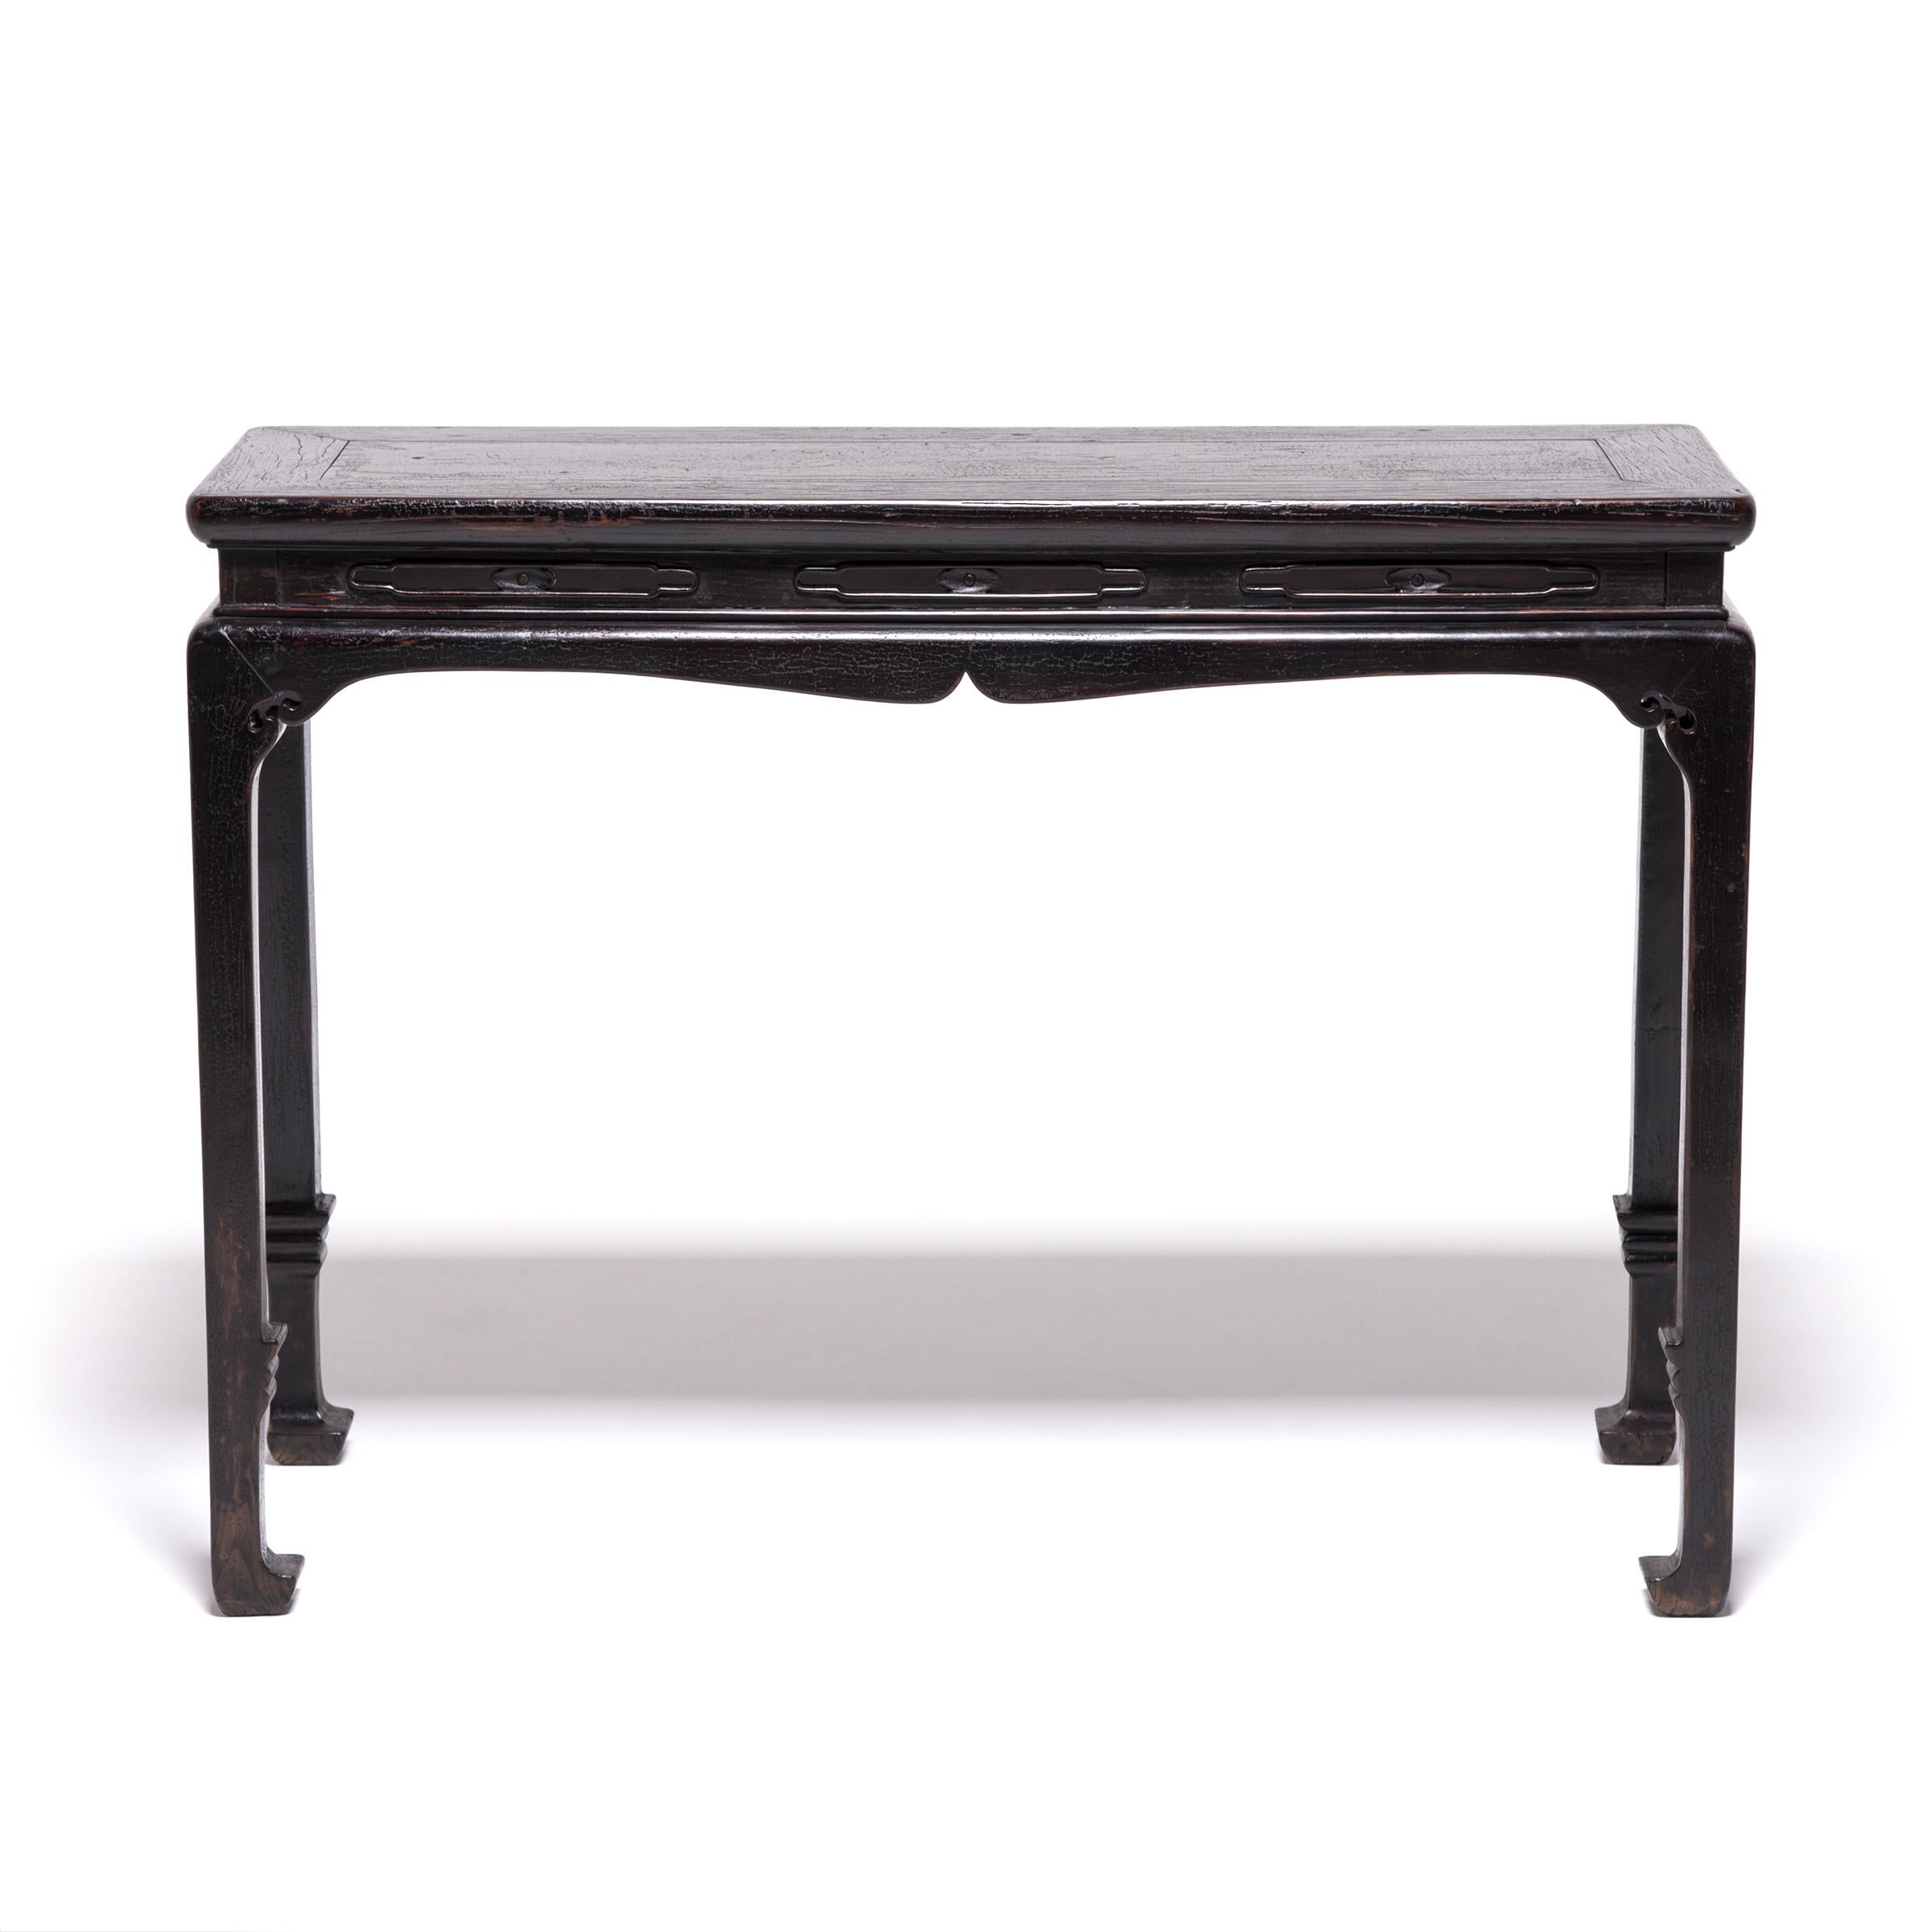 Qing Chinese Console Table with Cusped Apron